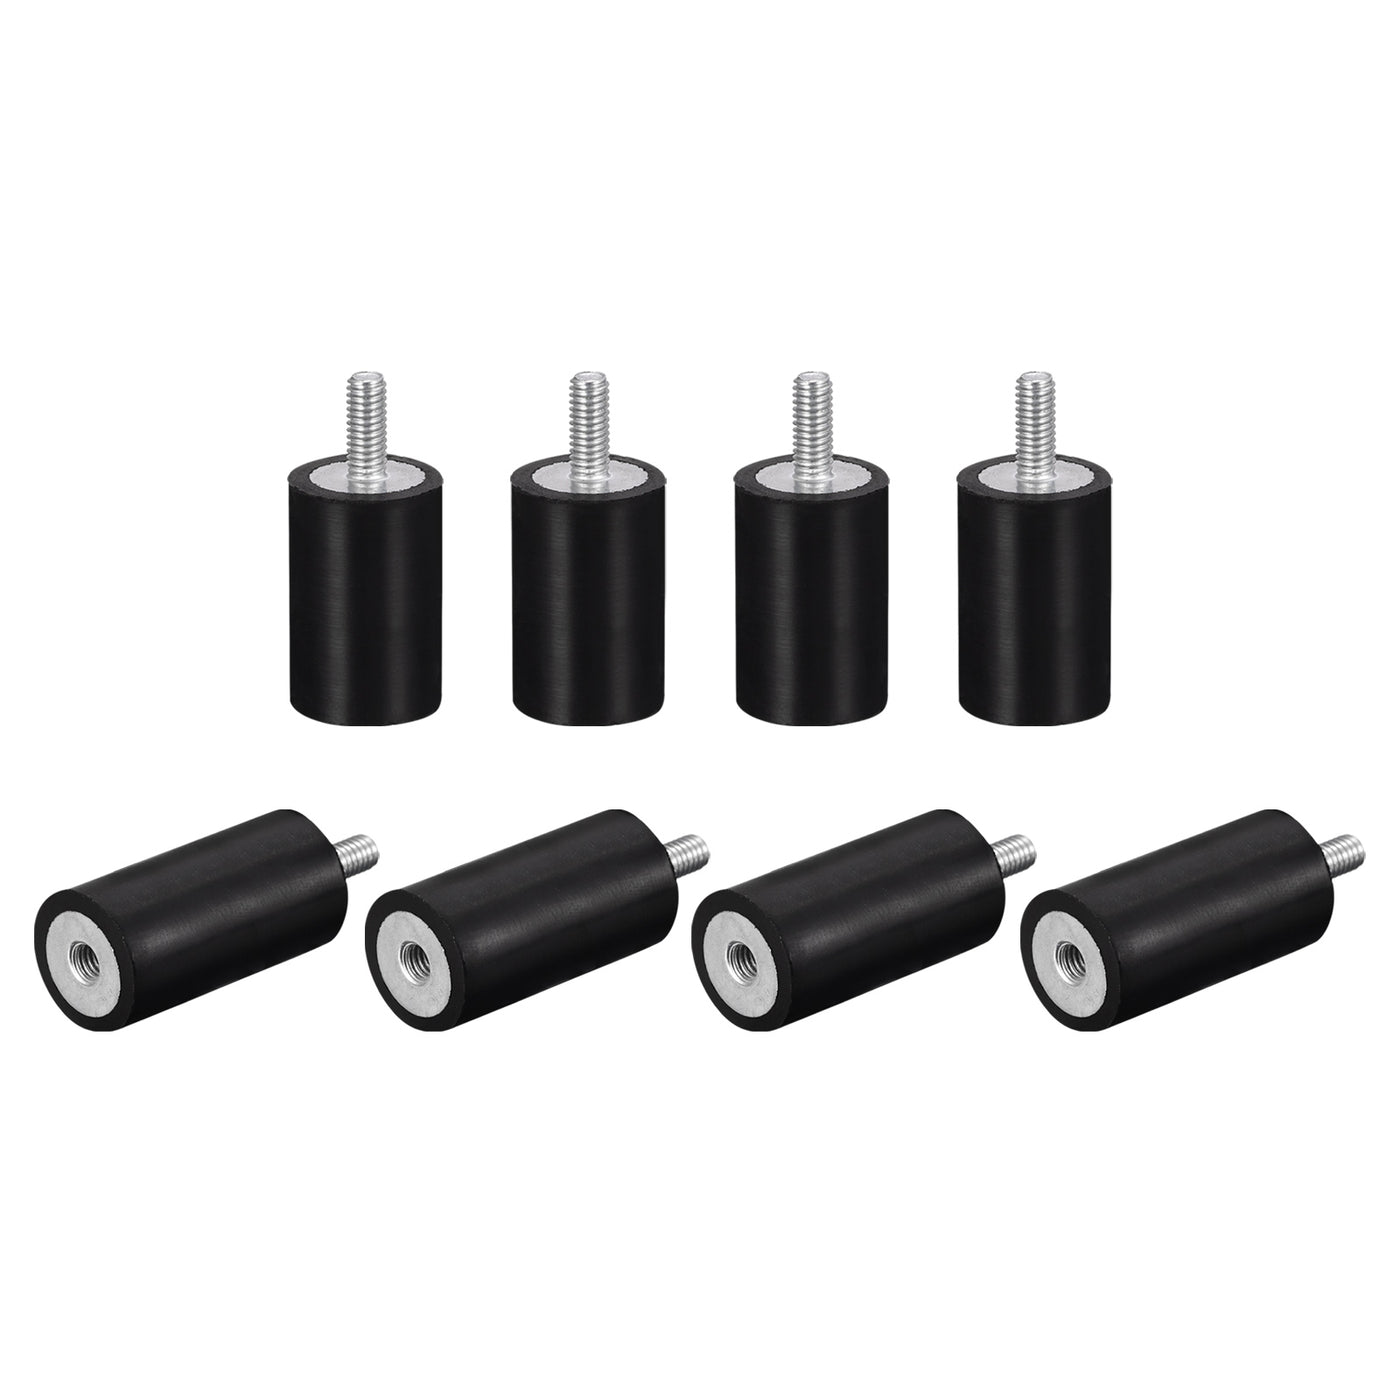 uxcell Uxcell Rubber Mount 8pcs M4 Male/Female Vibration Isolator Shock Absorber, D15mmxH30mm